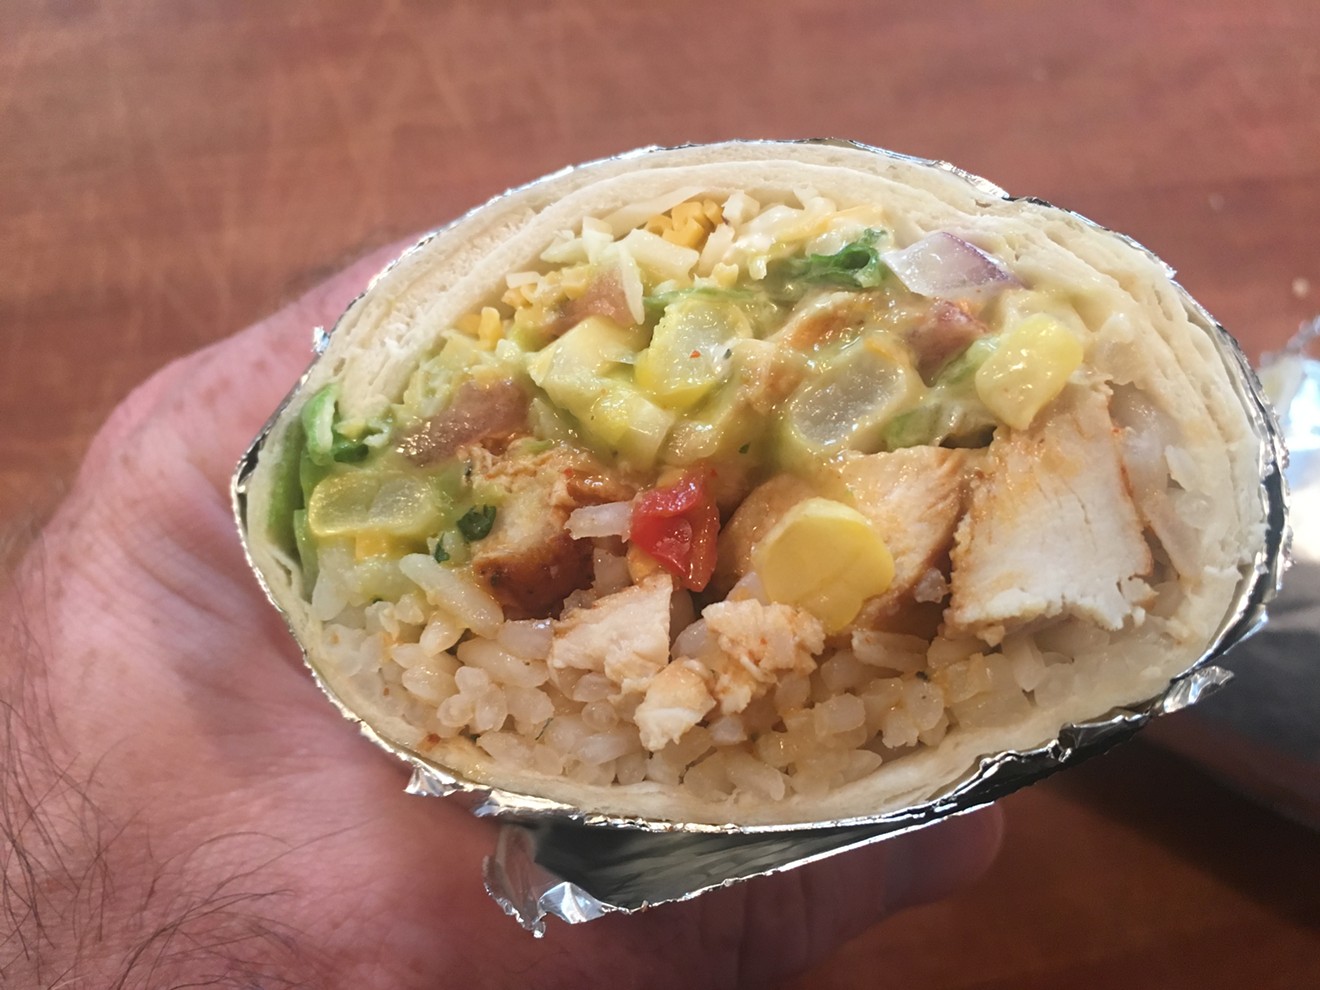 This is what a Chipotle-style burrito looks like when made at home.